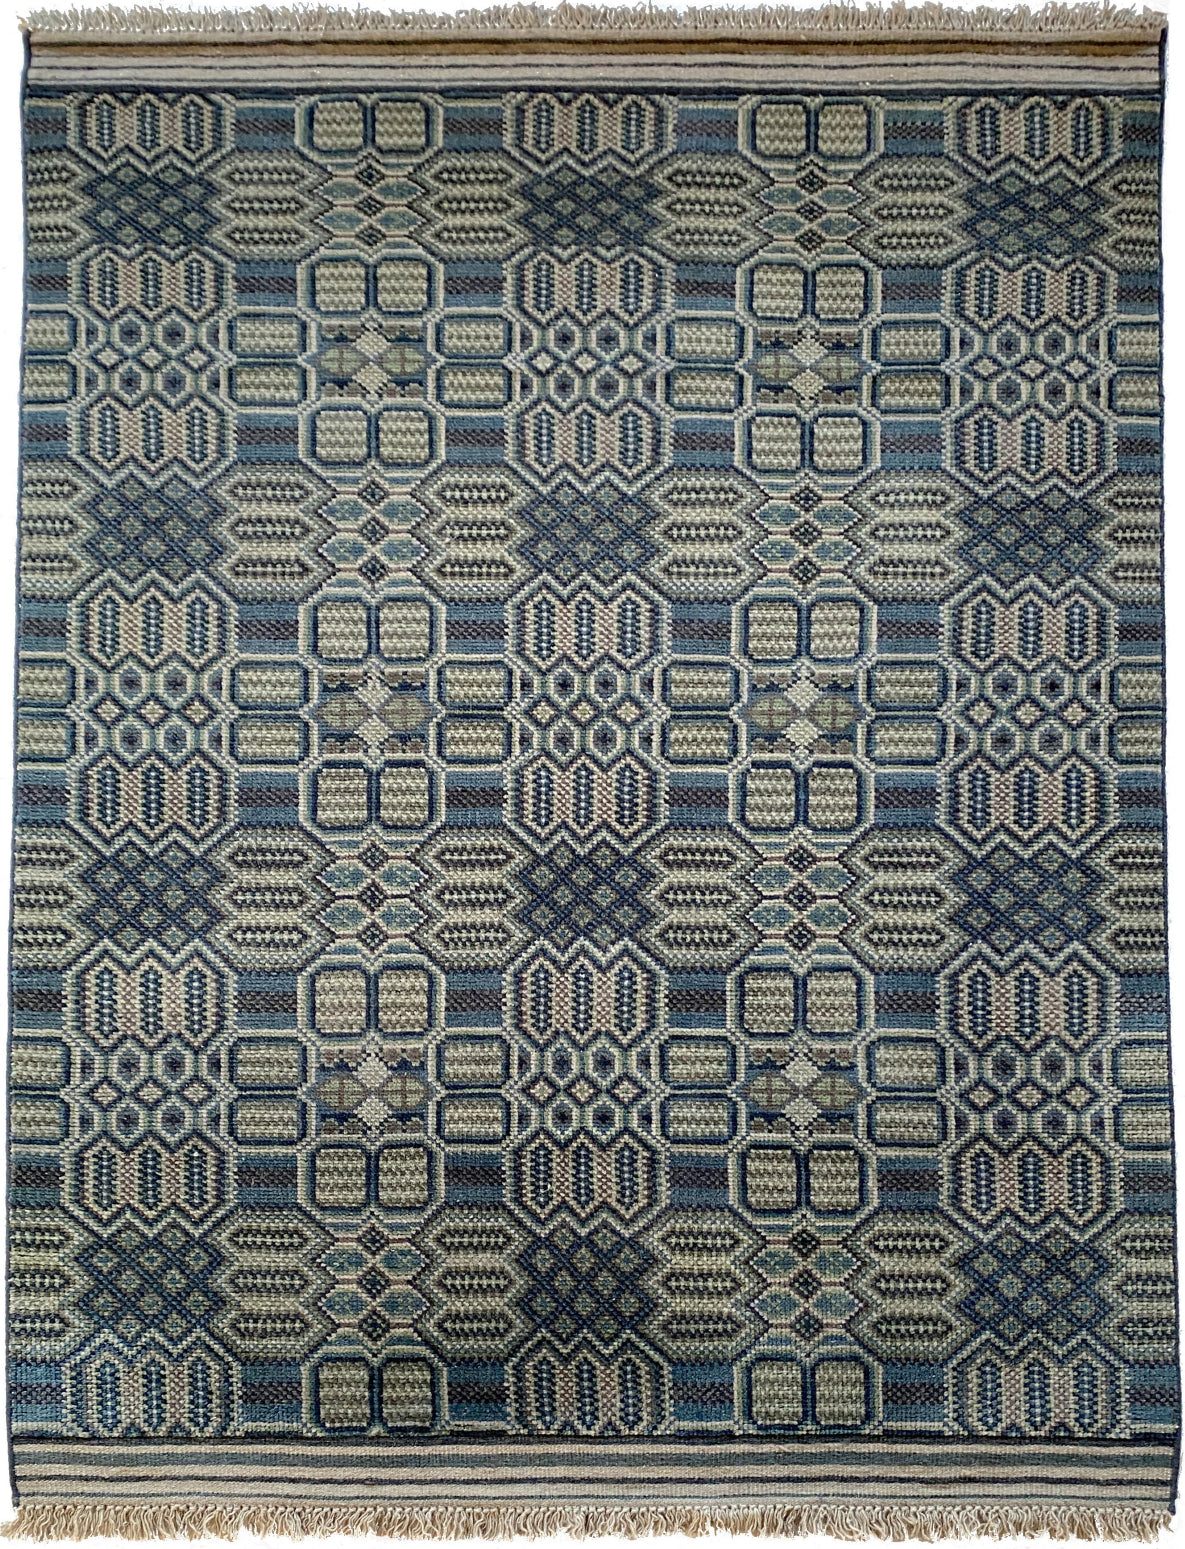 NuStory Bovina Angelica's Garden Green/Blue Area Rug by Newell Turner main image